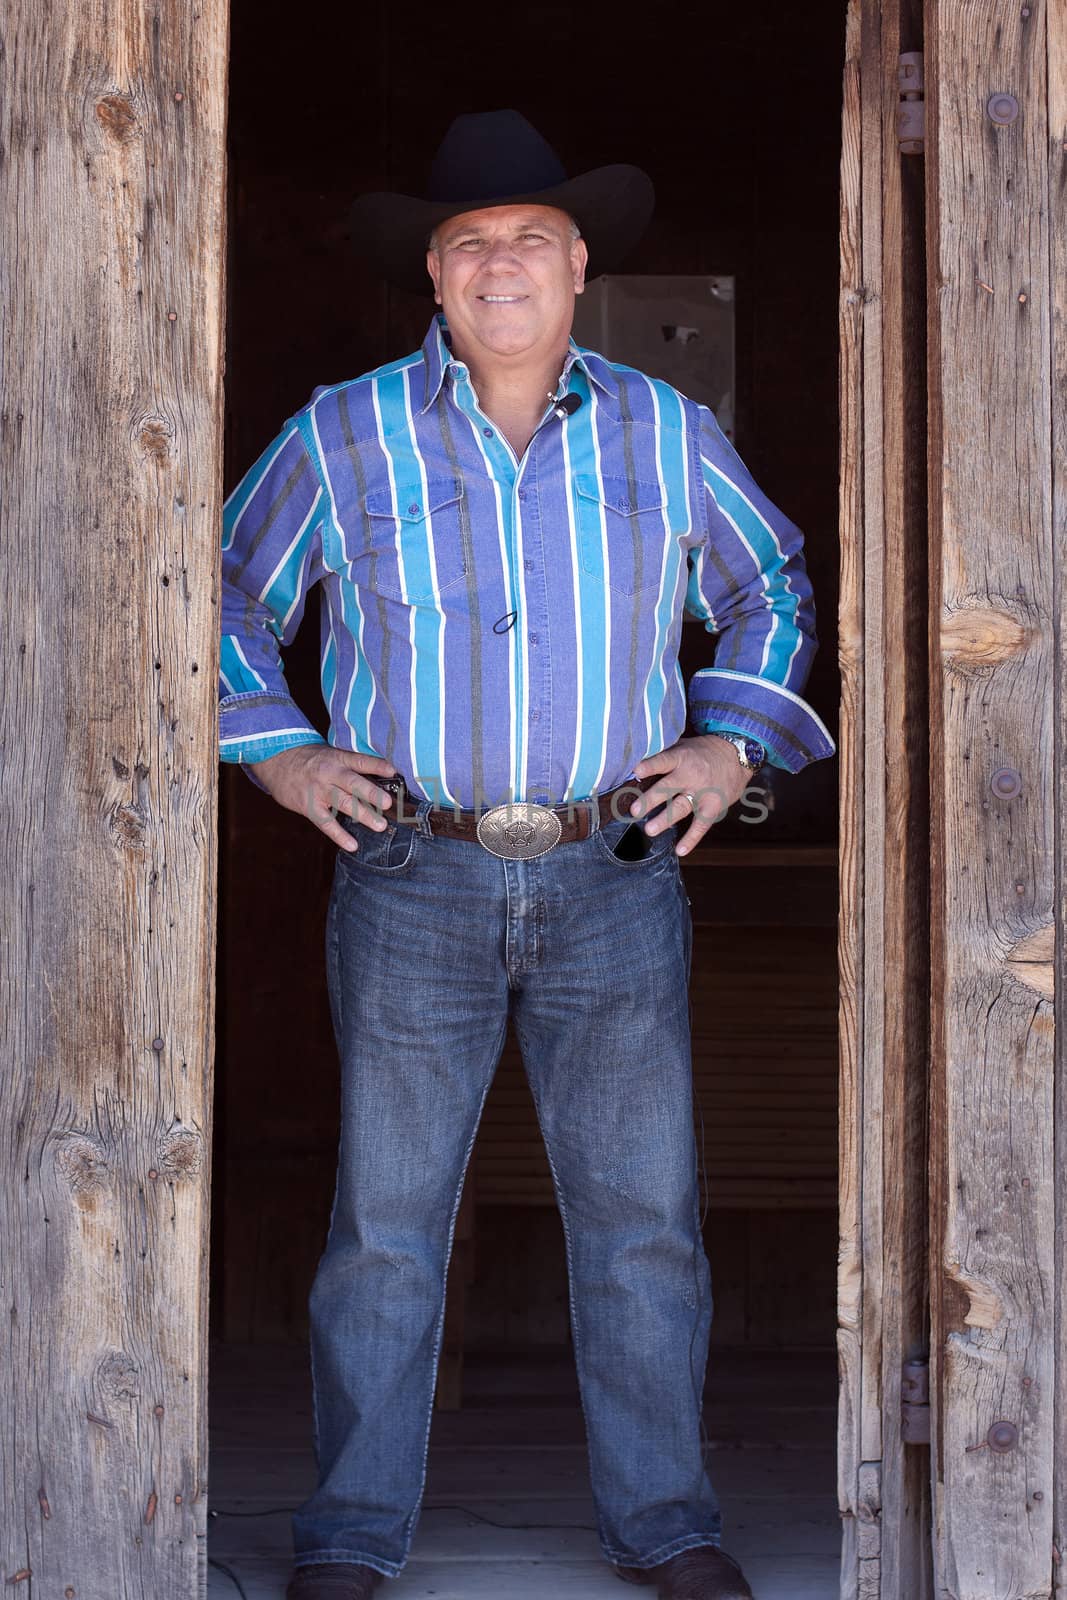 Texas cowboy standing in doorway of barn in jeans and western shirt